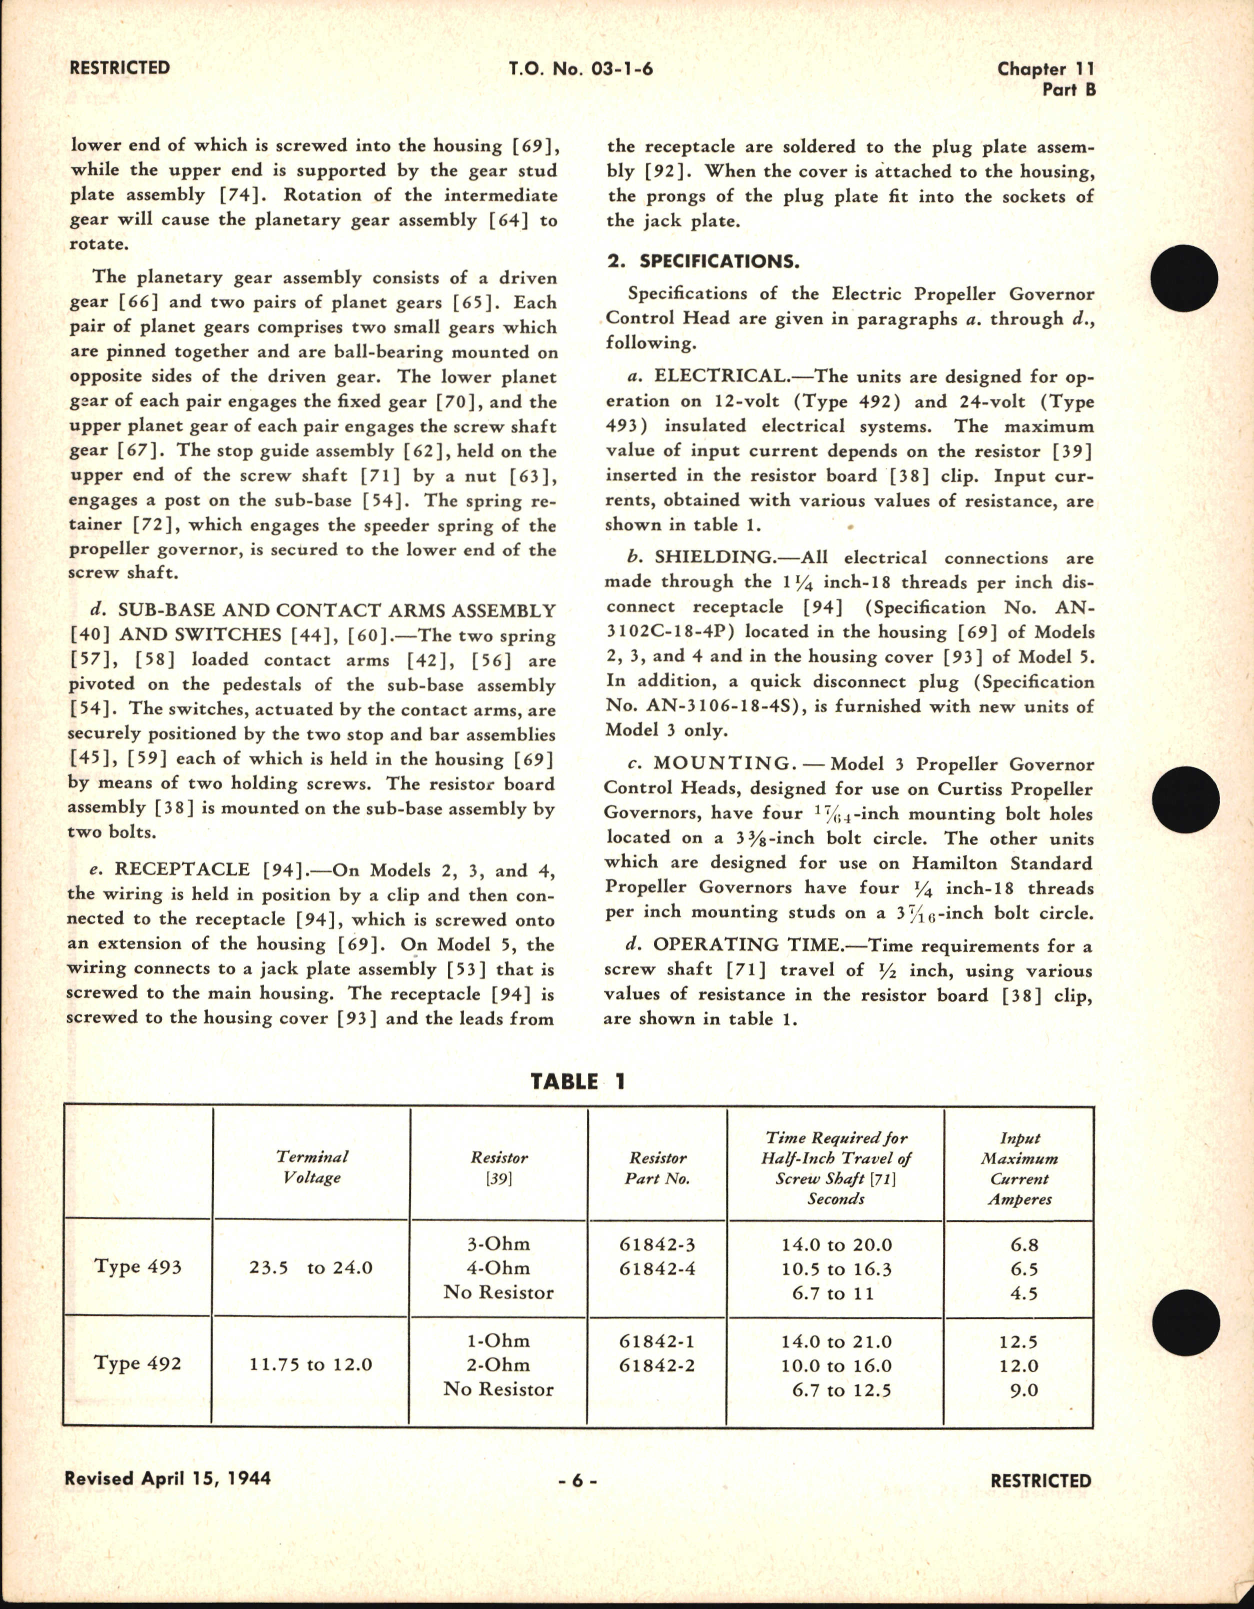 Sample page 6 from AirCorps Library document: Overhaul Instructions for Electric Propeller Governor Control Head